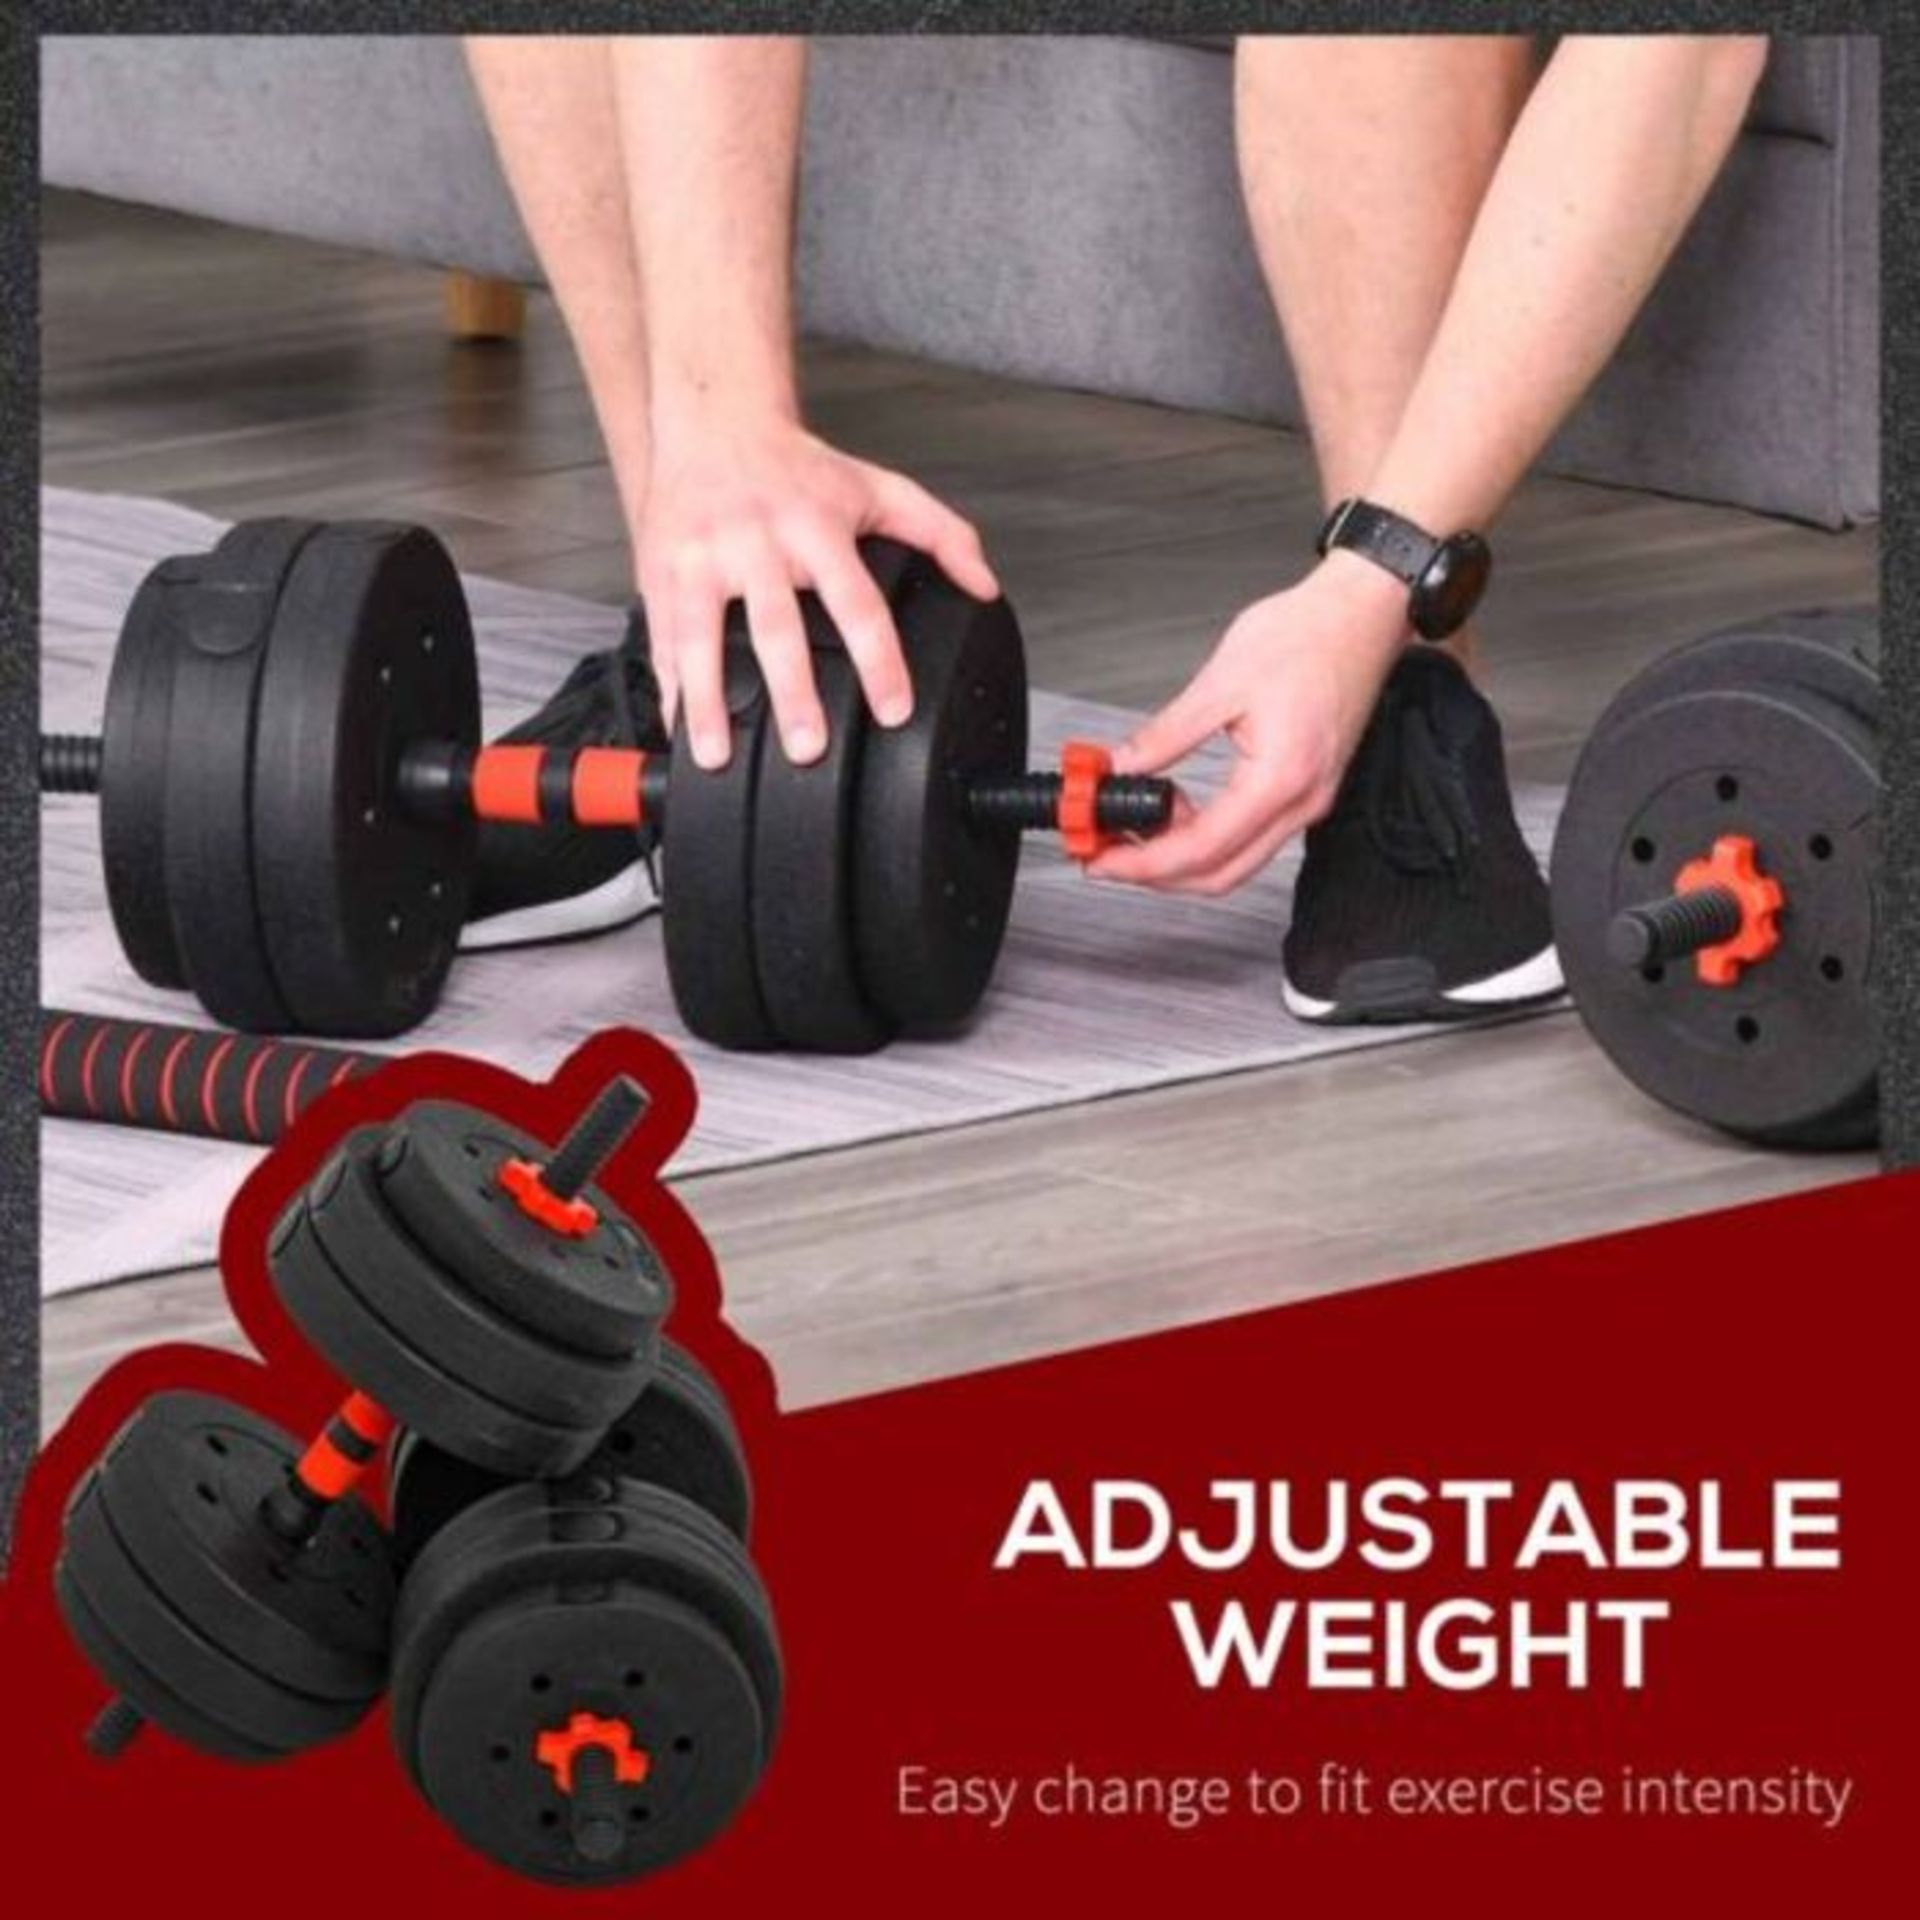 Hom Com 2 in1 Barbell/Dumb bell 30kg weight set, new and boxed, Similar sets retail at around ?50 - Image 2 of 4